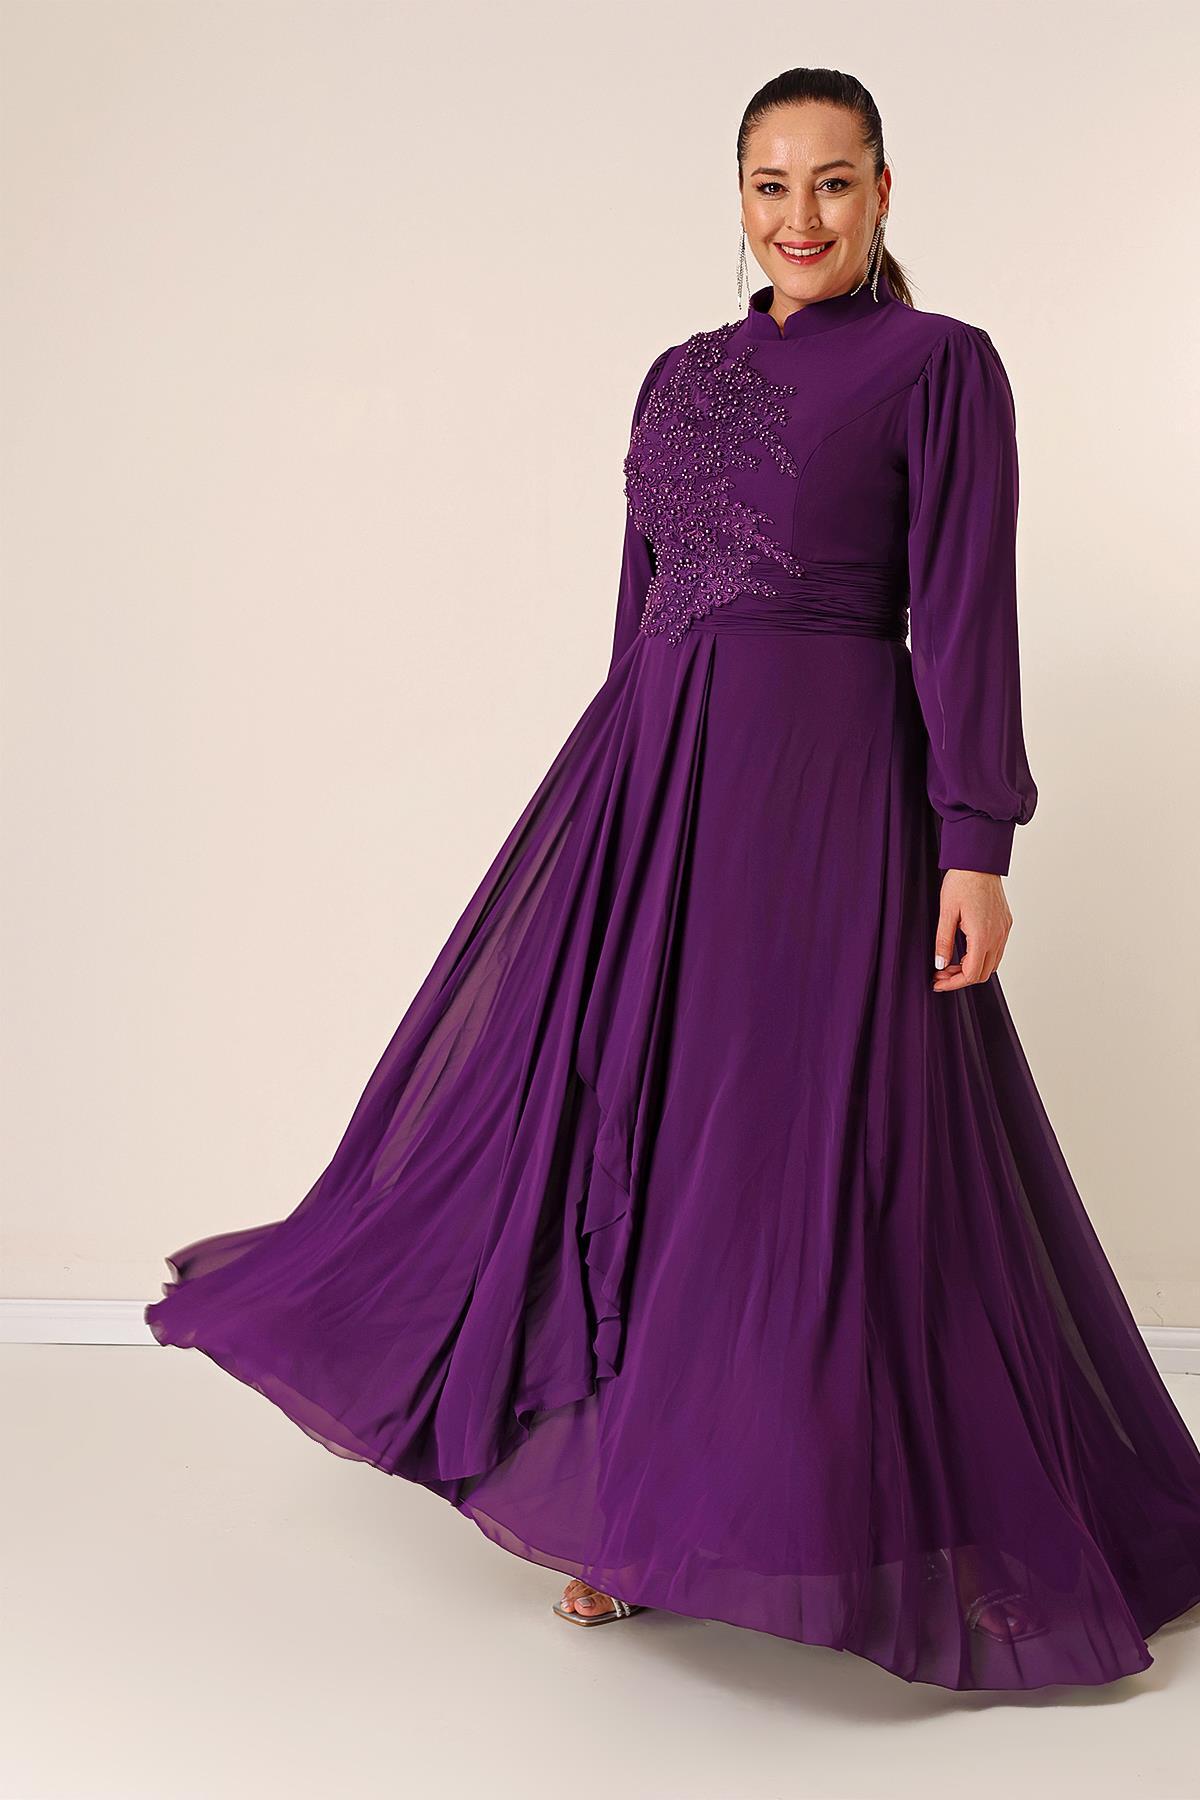 Levně By Saygı Beaded Embroidered Lined Plus Size Long Chiffon Dress with Flounce on the Front